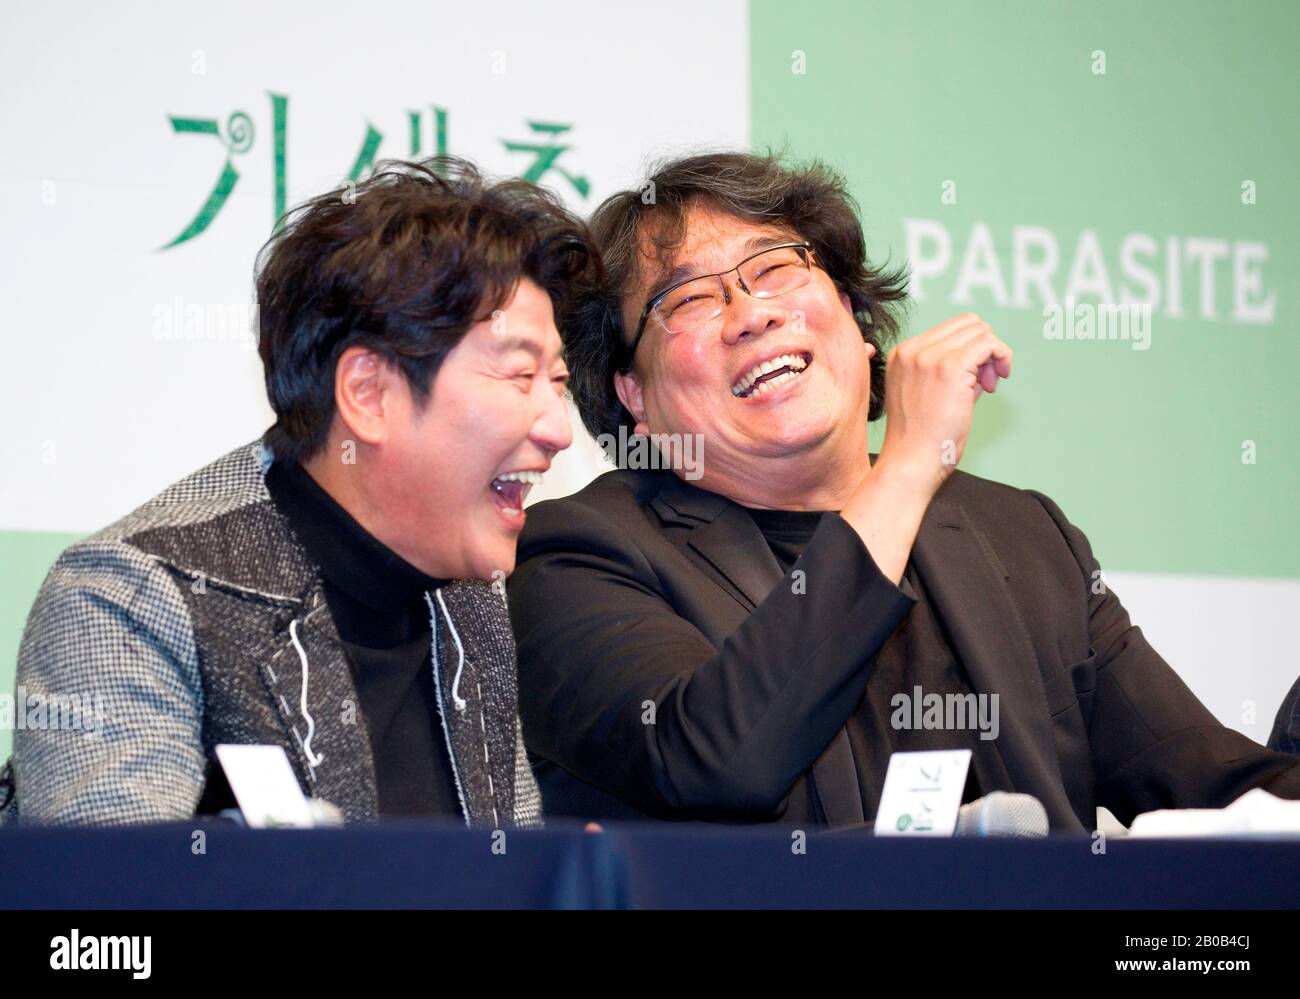 Bong Joon-Ho and Song Kang-Ho, Feb 19, 2020 : Bong Joon-Ho (R), South Korean director of the Oscar-winning film 'Parasite' and actor Song Kang-ho attend a press conference in Seoul, South Korea. The Korean black comedy thriller won four Oscar titles at the Academy Awards on Feb 9, 2020, becoming the first non-English language film to capture best picture in its 92-year history. Credit: Lee Jae-Won/AFLO/Alamy Live News Stock Photo